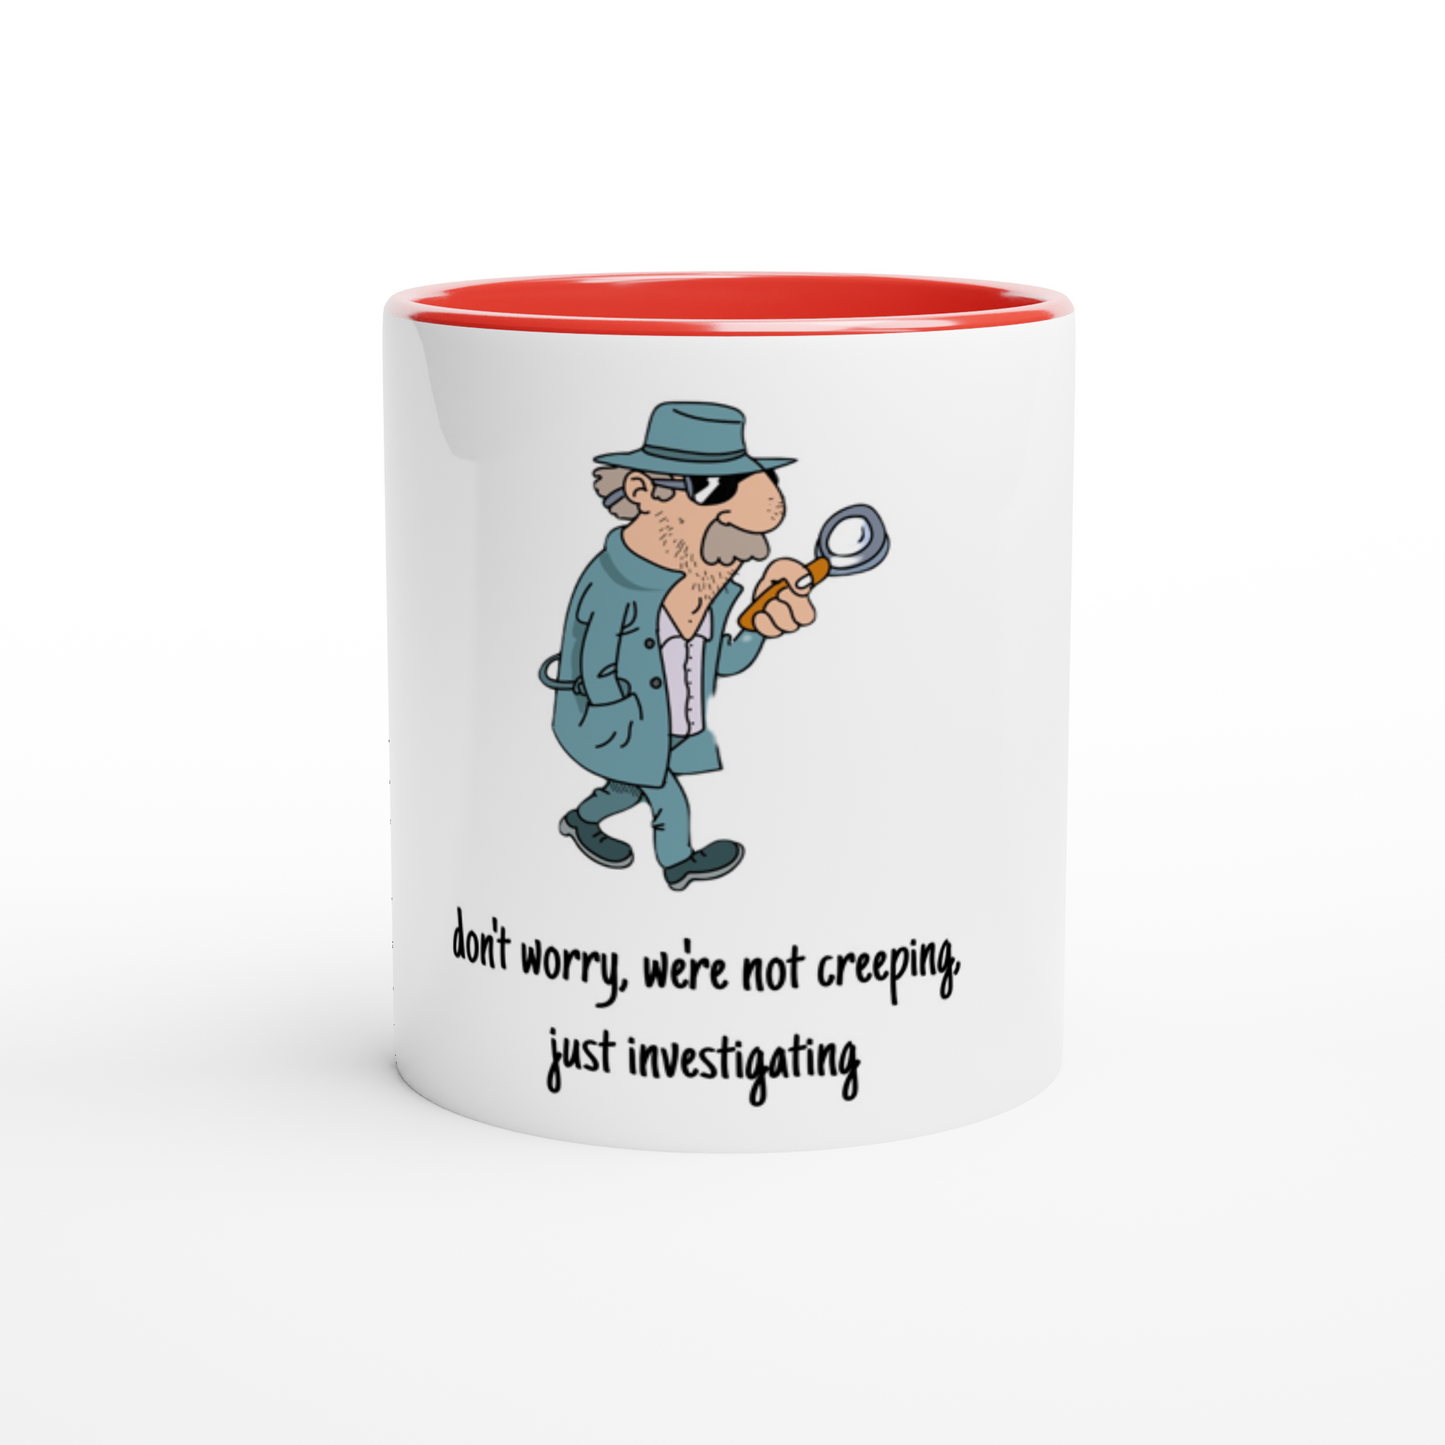 White 11oz Ceramic Mug with Color Inside - Don't Worry, We're Not Creeping, Just Investigating